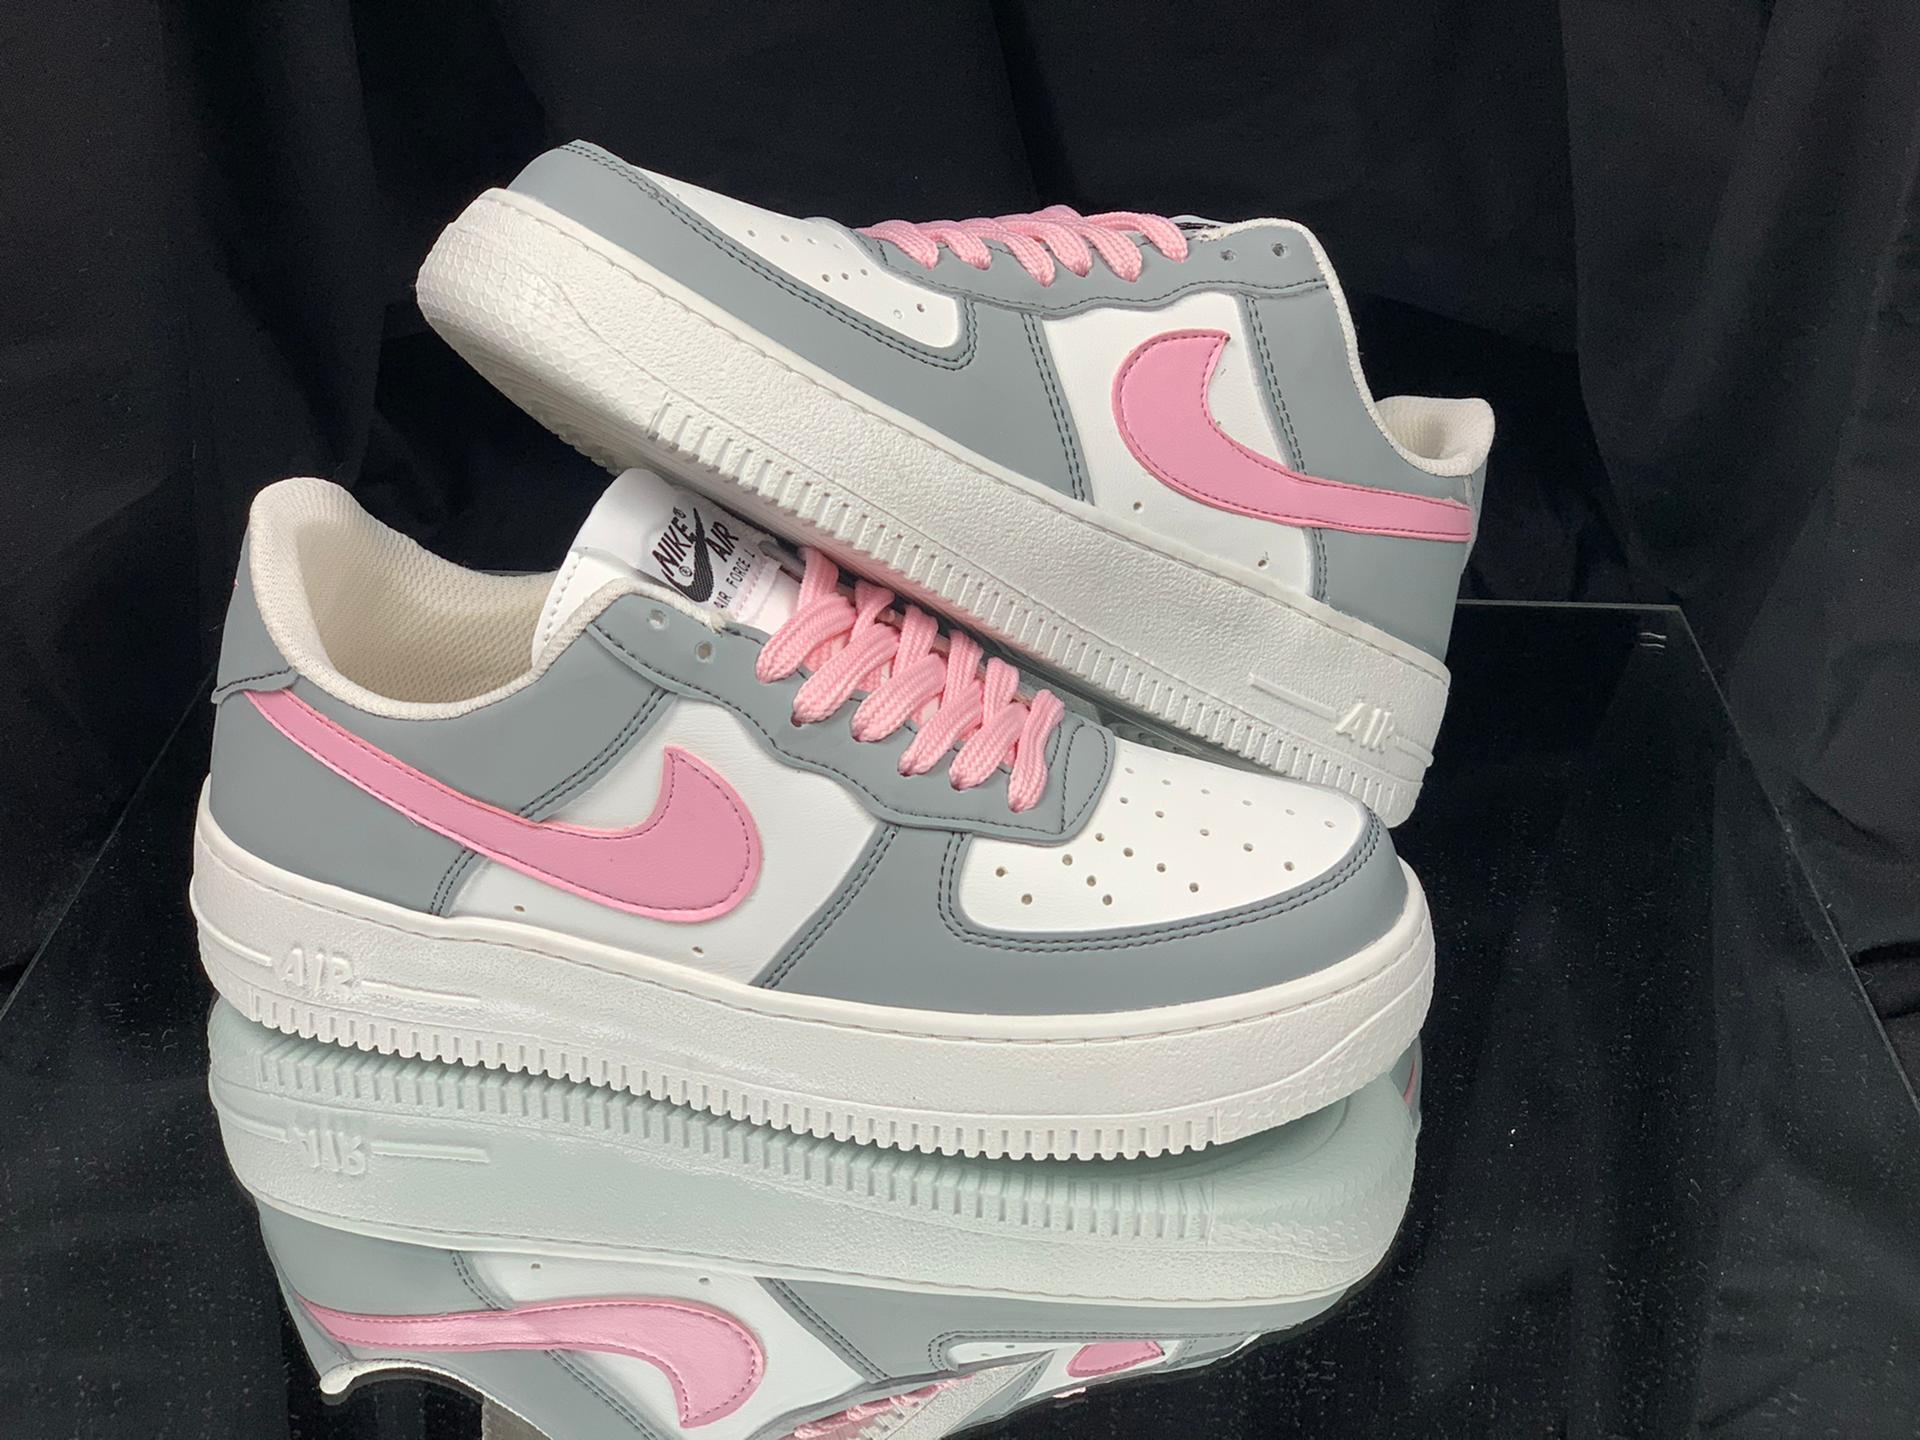 Inconsistente Roux muy agradable Nike Air Force 1 Rosa/Gris – DeportivasYRopa